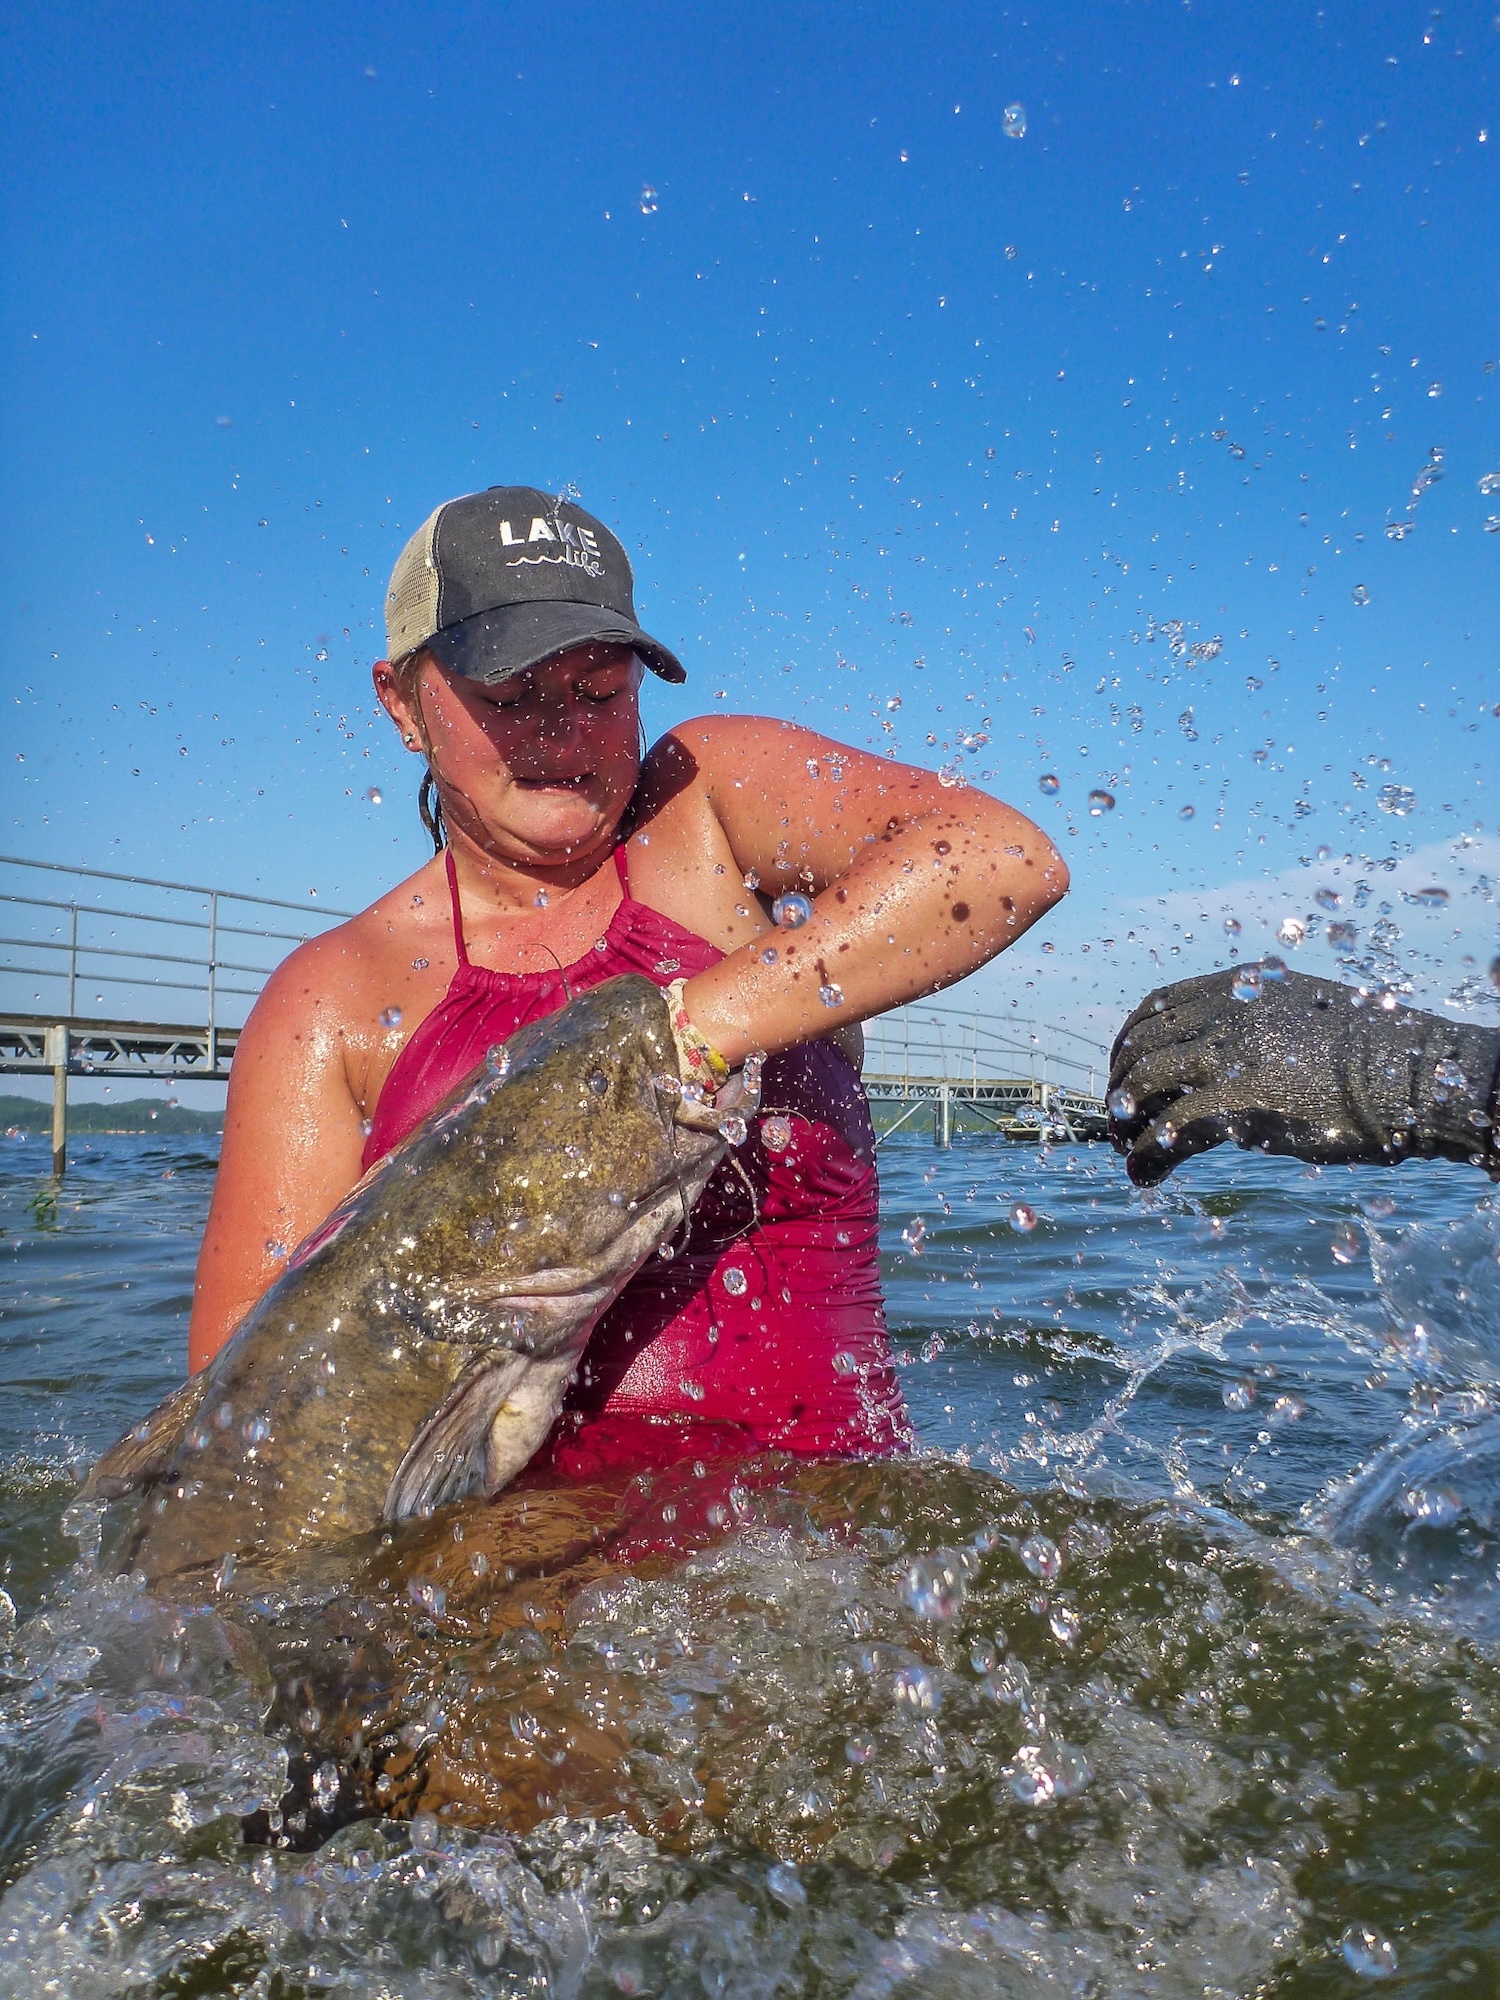 The Complete Guide to Noodling Catfish